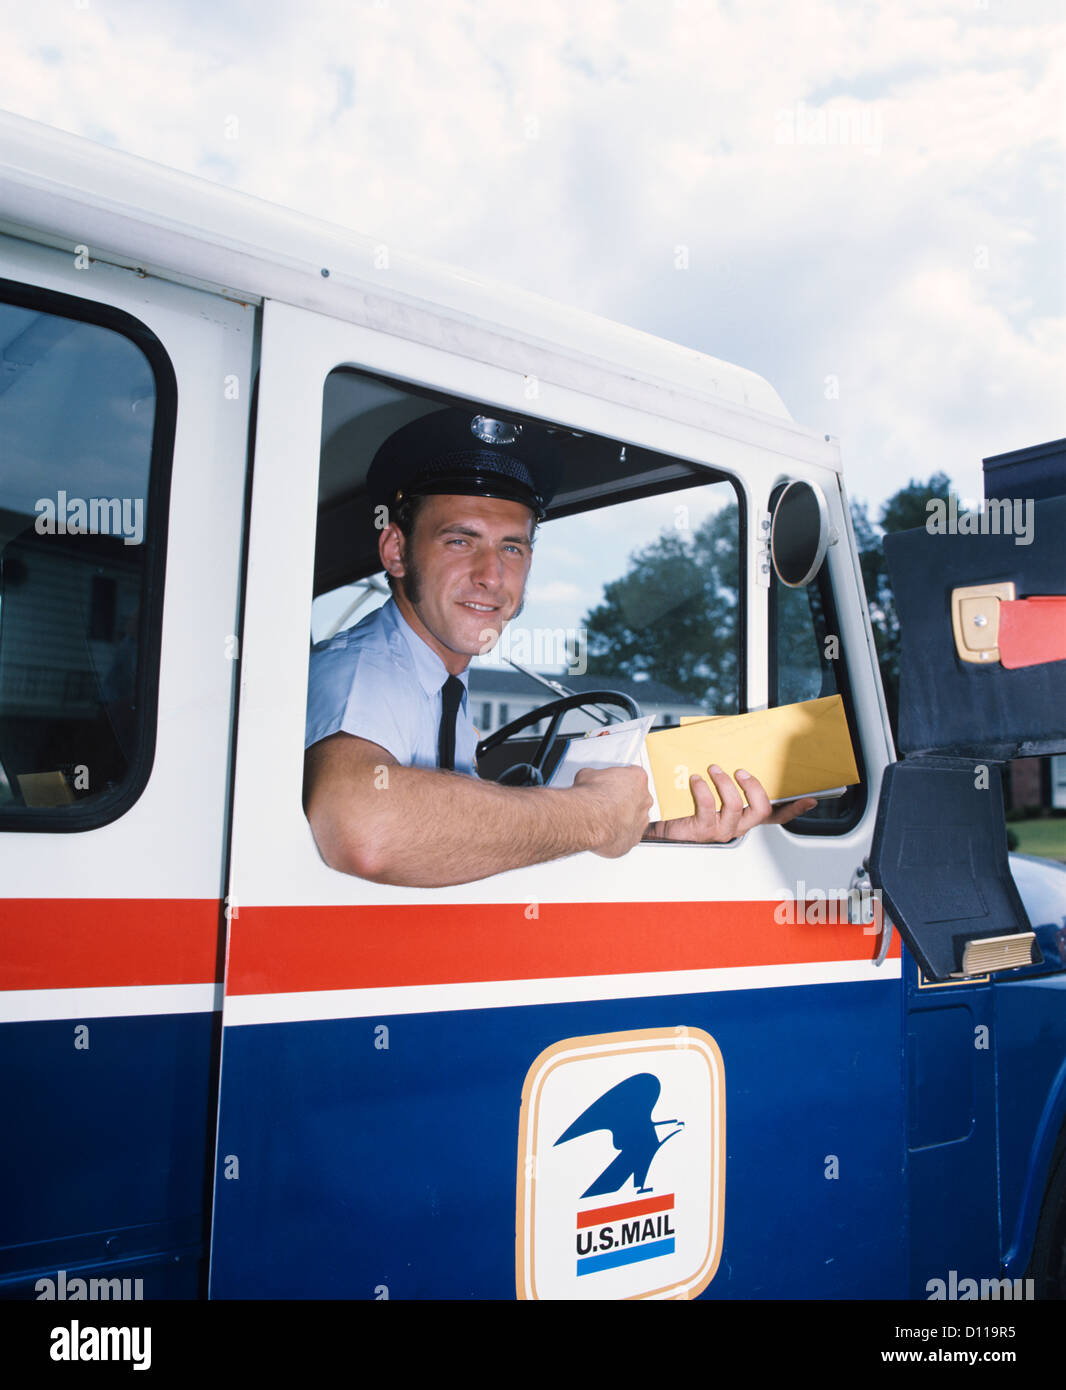 1970s SMILING MAILMAN IN U.S. MAIL TRUCK DELIVERING MAIL TO HOME MAILBOX LOOKING AT CAMERA Stock Photo